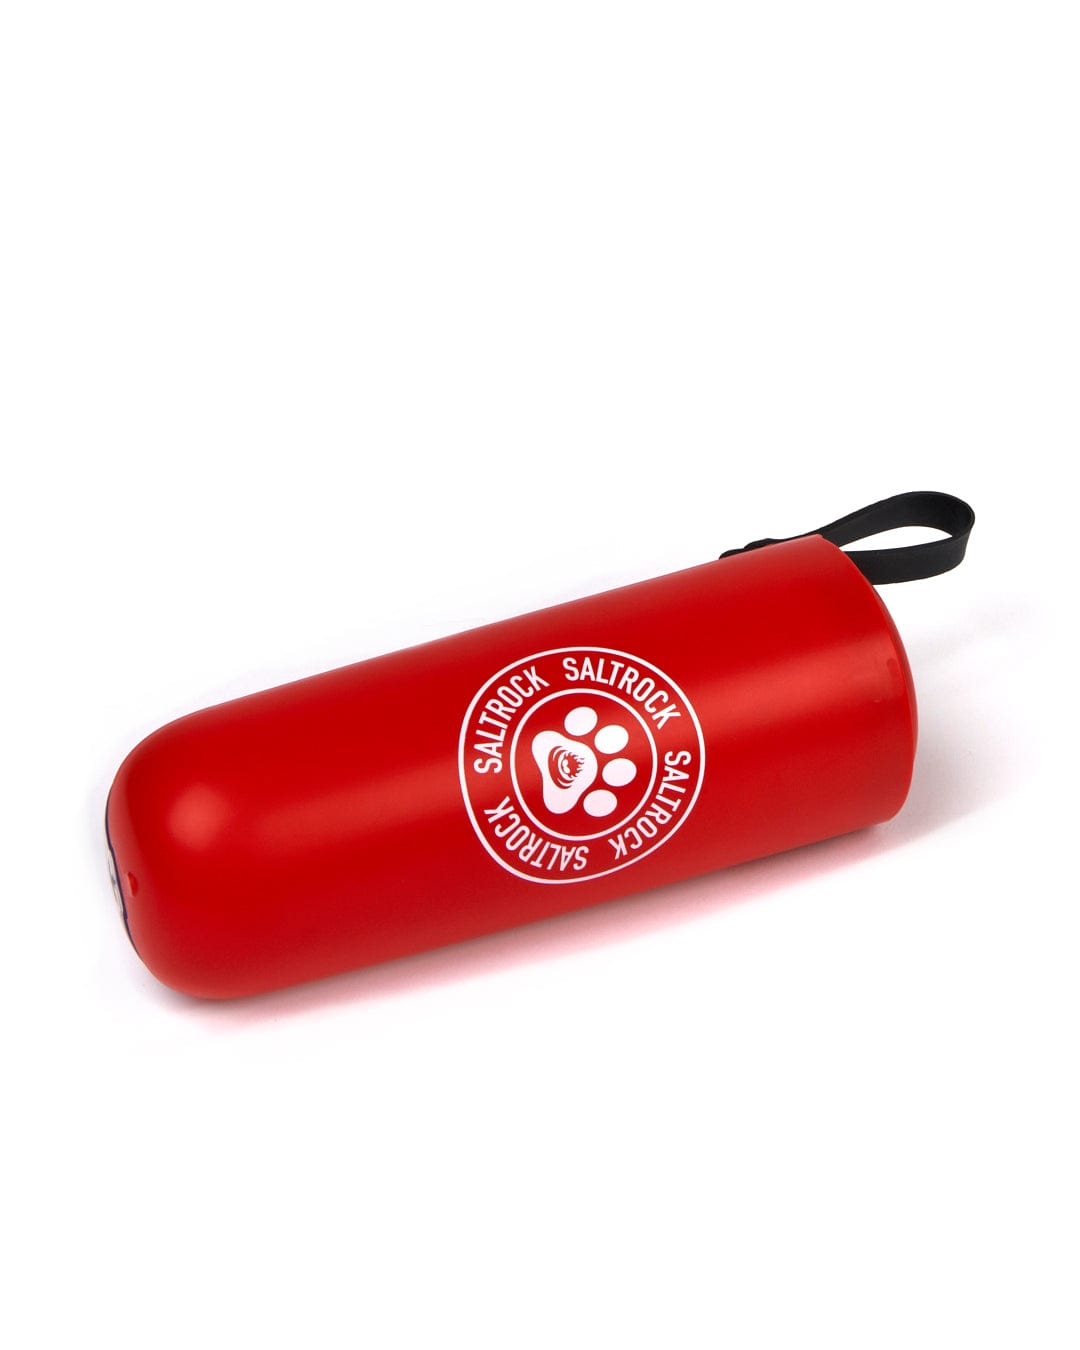 A red bag with a logo on it showcases Saltrock branding.